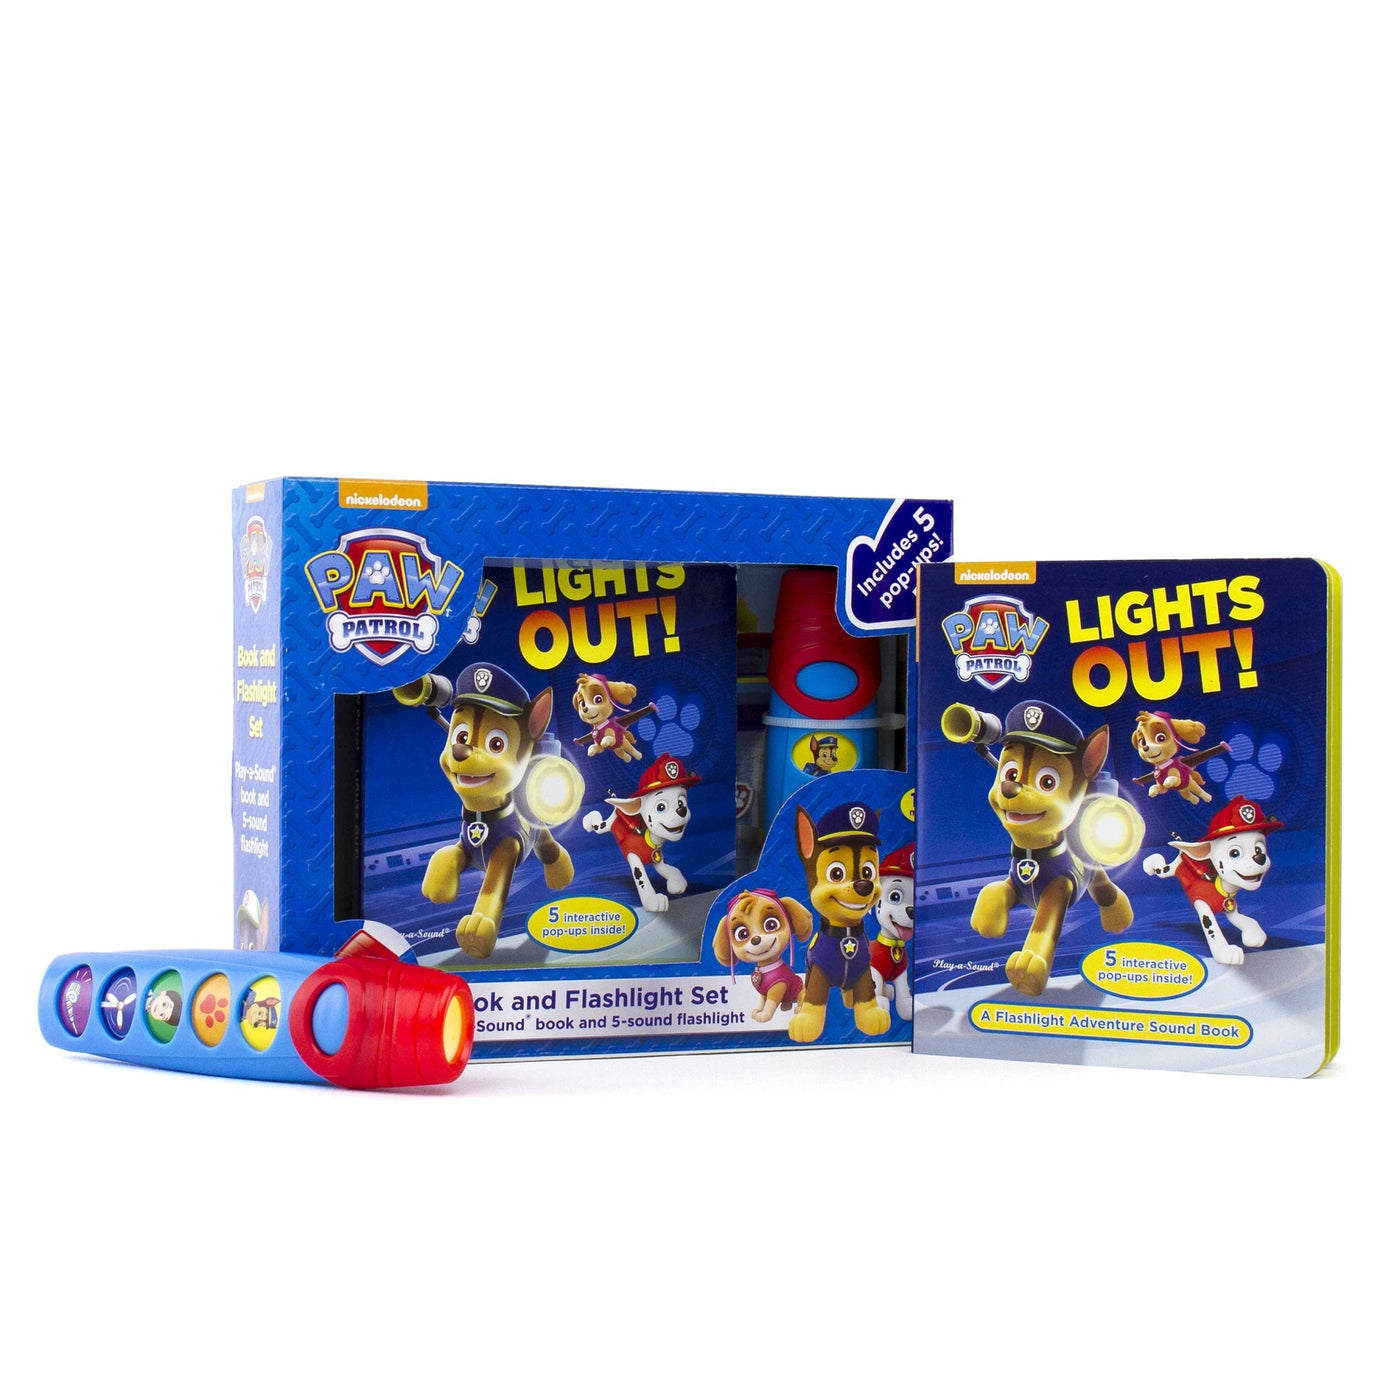 Nickelodeon Paw Patrol Chase, Marshall, Skye And More! - Light The Way! Pop-Up Board Book And Sound Flashlight Toy Set